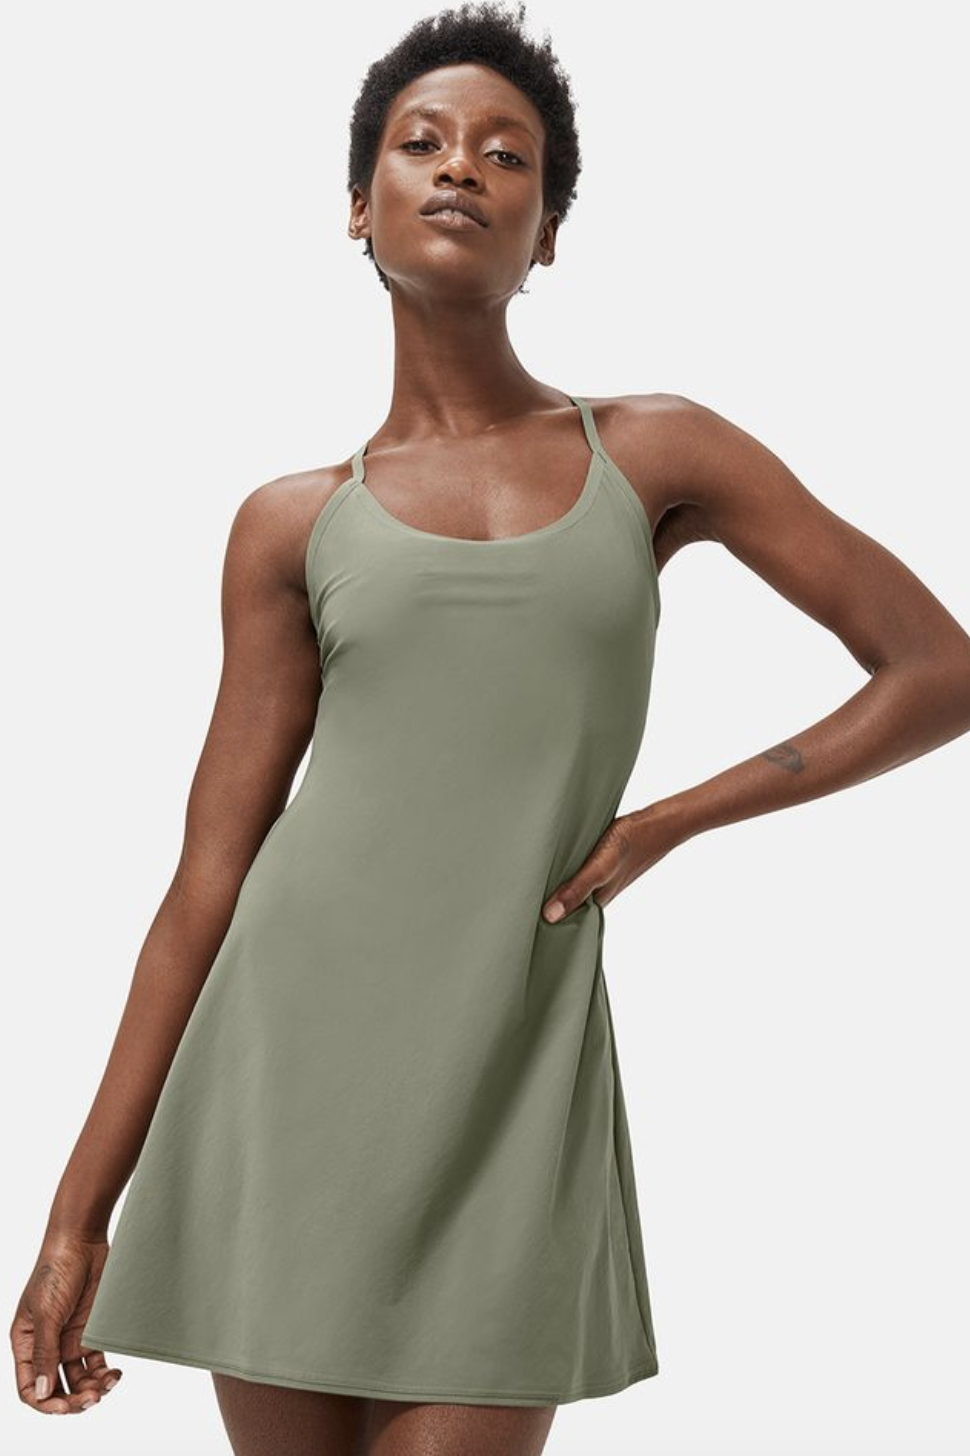 Outdoor Voices Launches Athena Dress For Exercise 2021